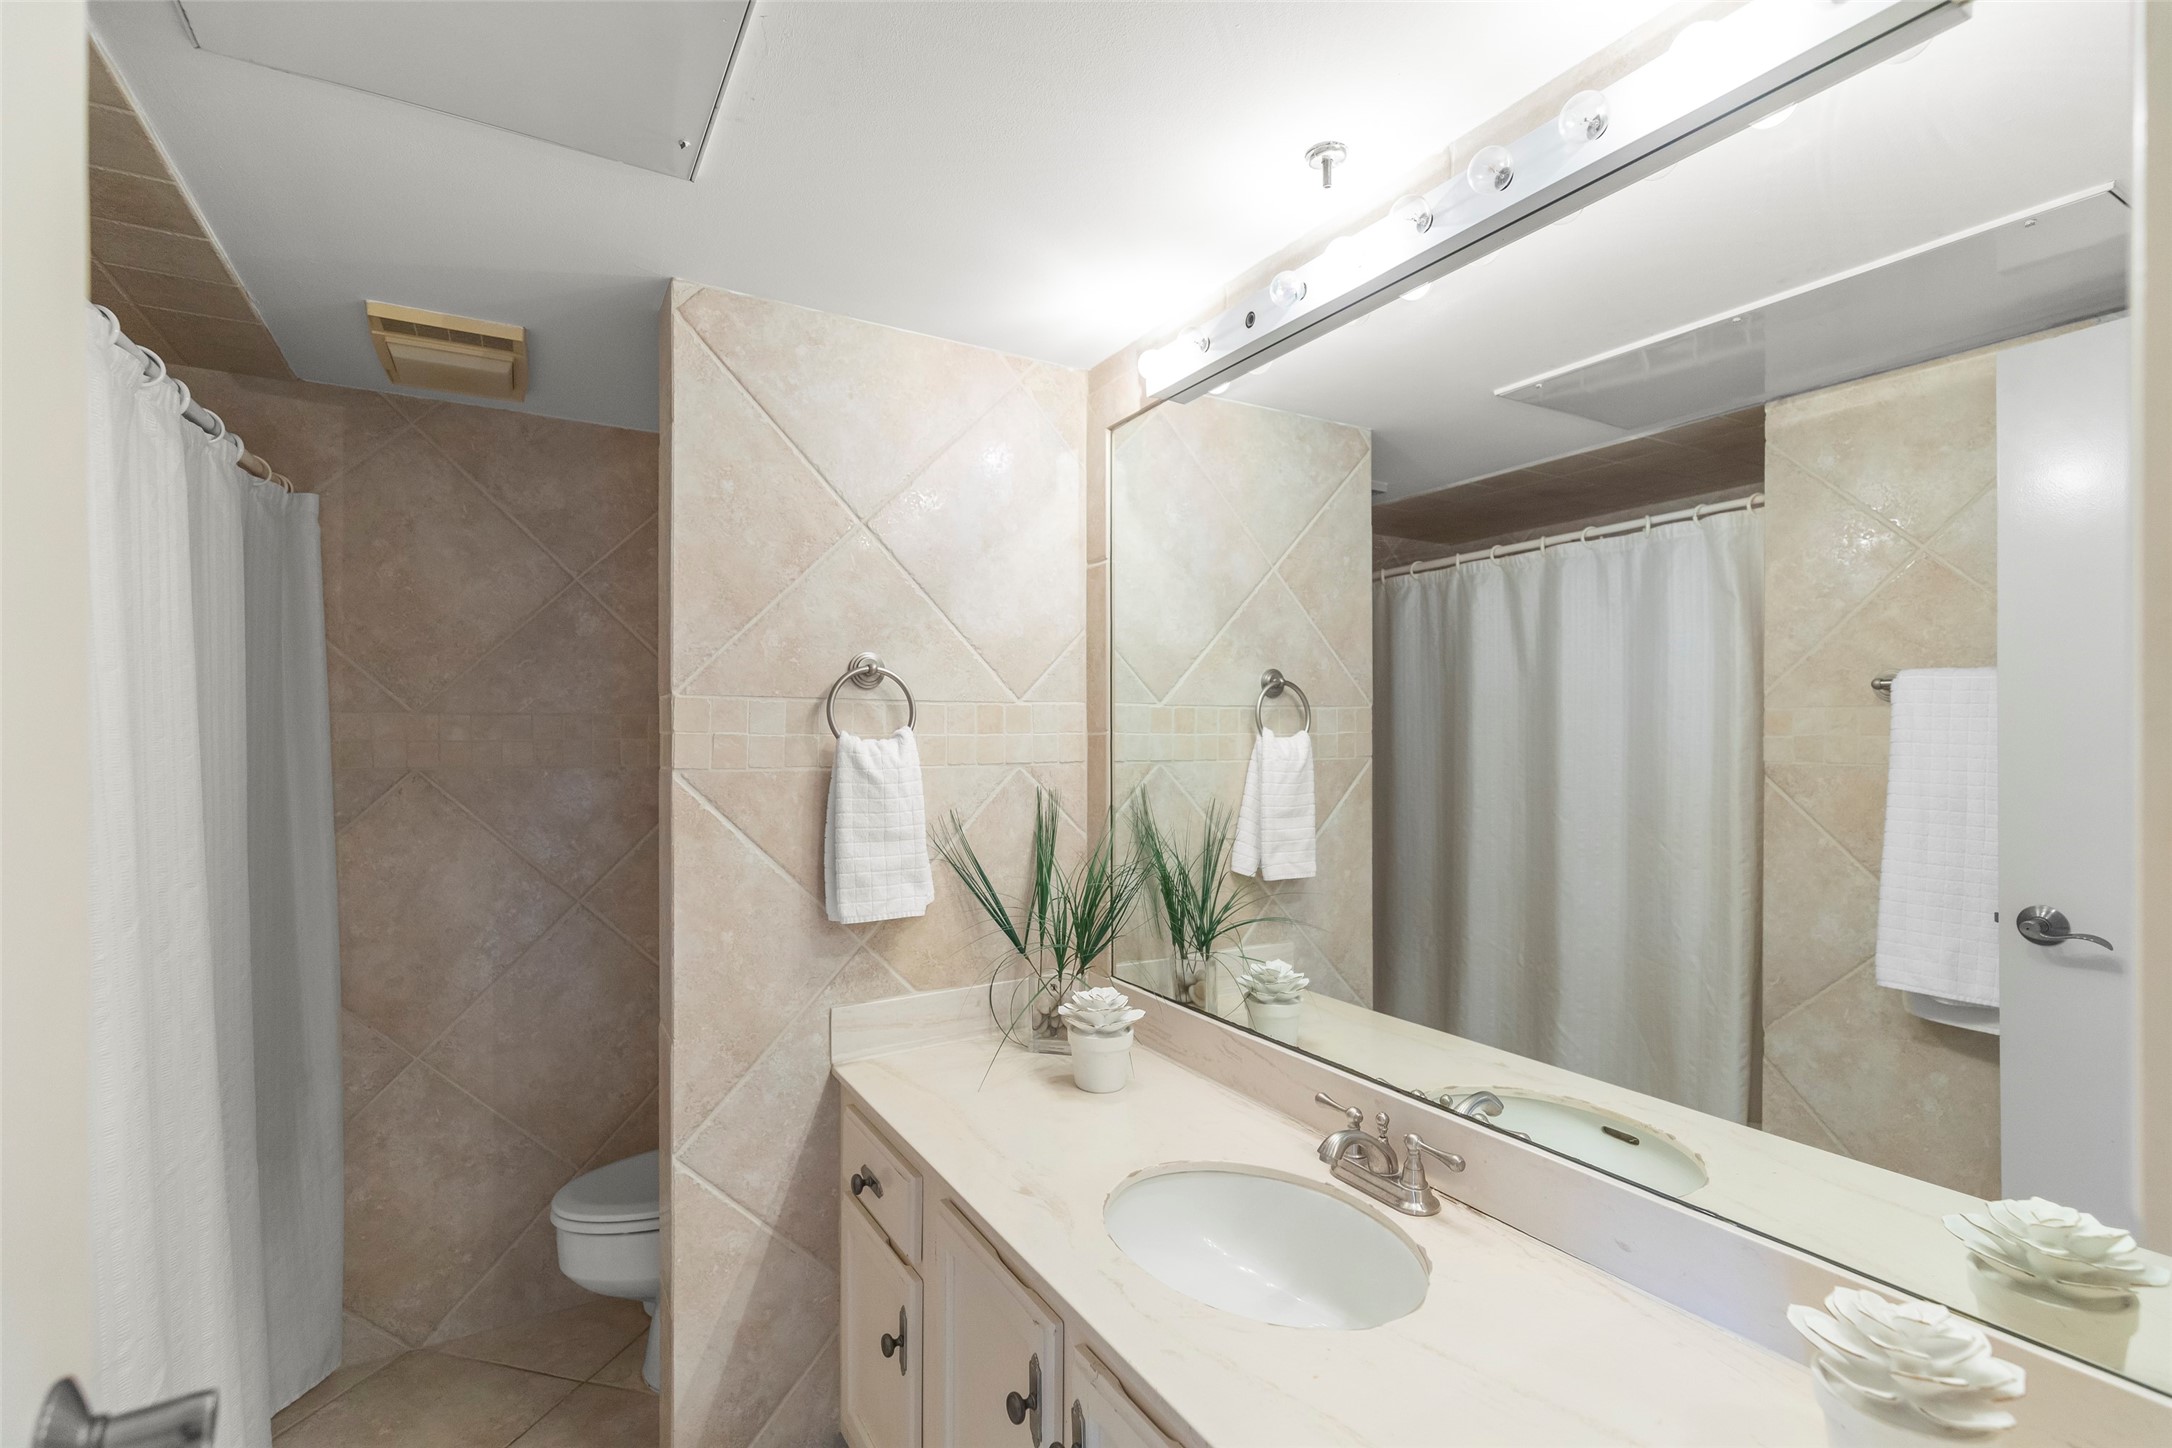 Secondary bathroom with bath/standing shower